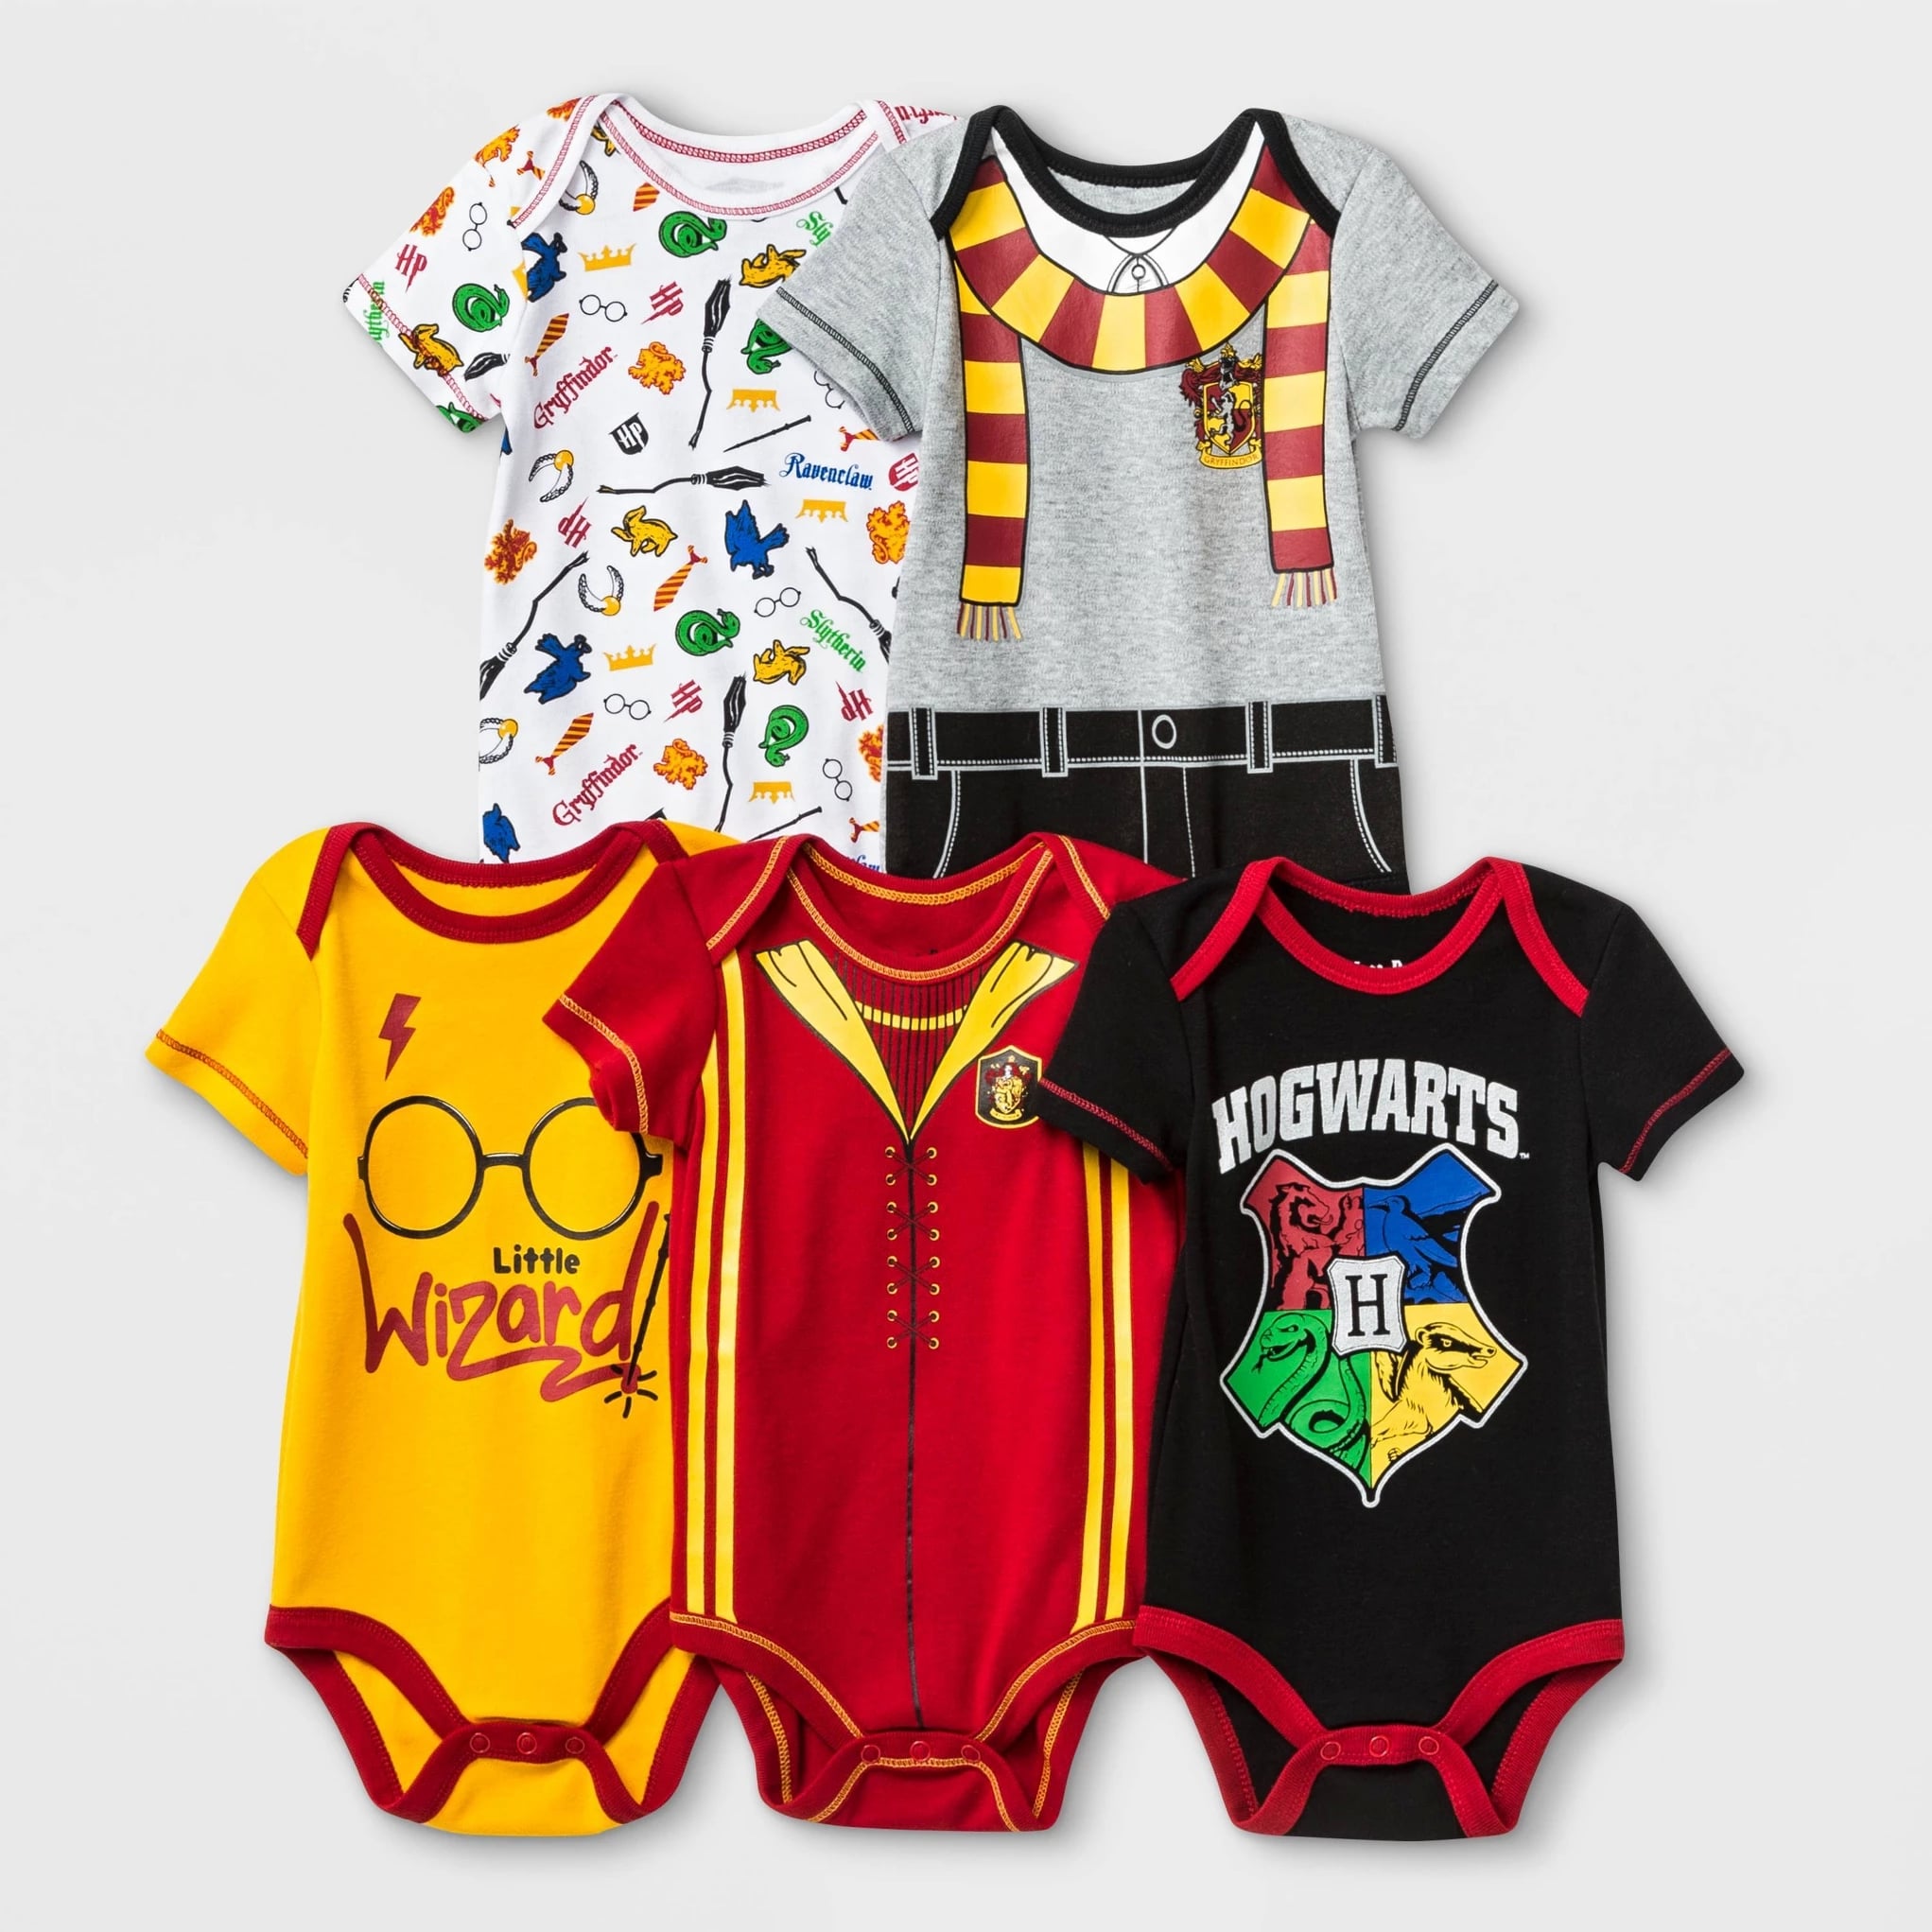 Harry Potter Gifts For Kids of All Ages • Flying With A Baby - Family Travel